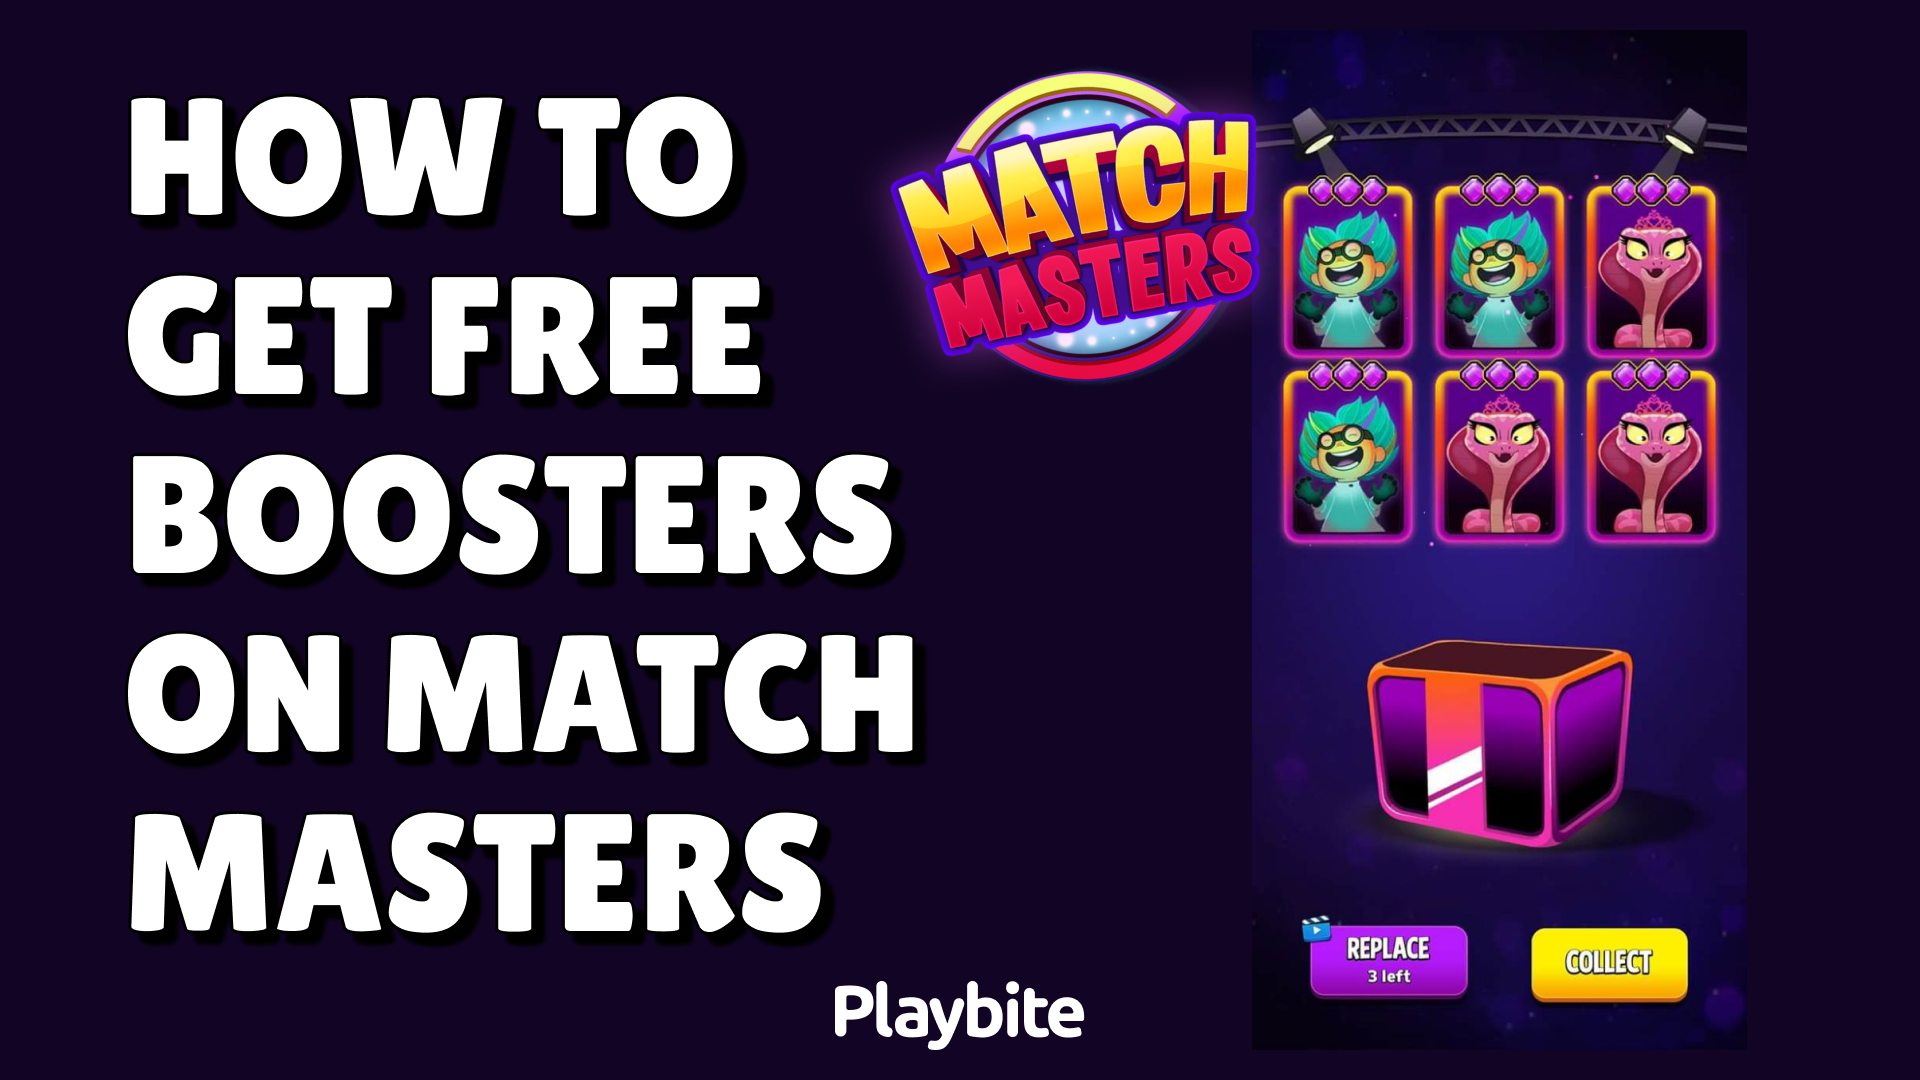 How To Get Free Boosters On Match Masters